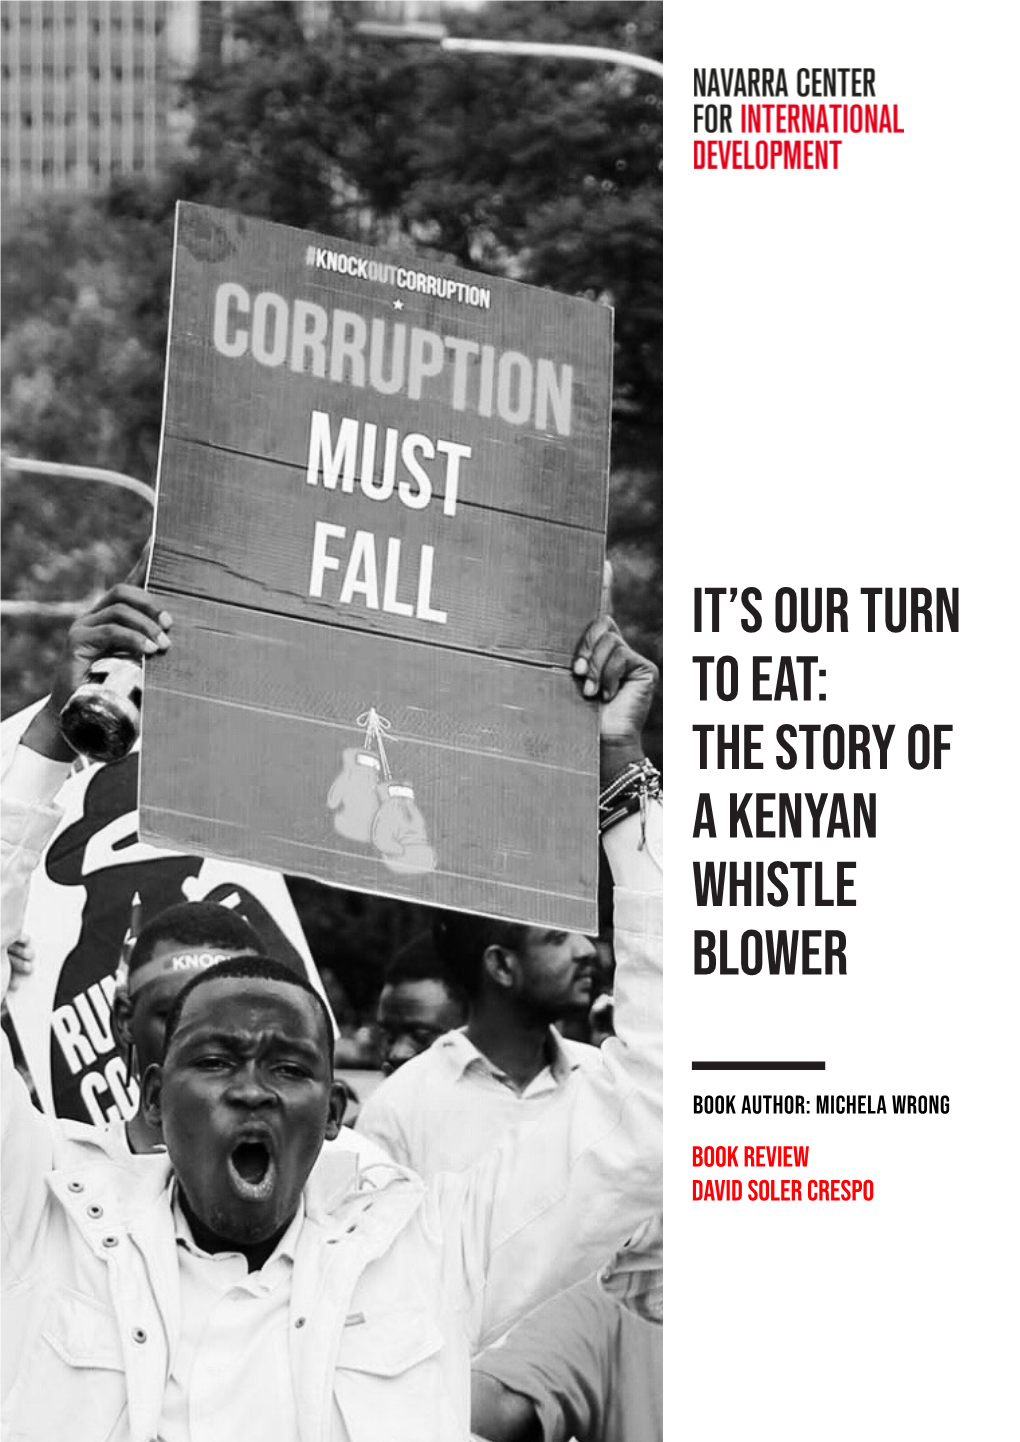 It's Our Turn to Eat: the Story of a Kenyan Whistle Blower